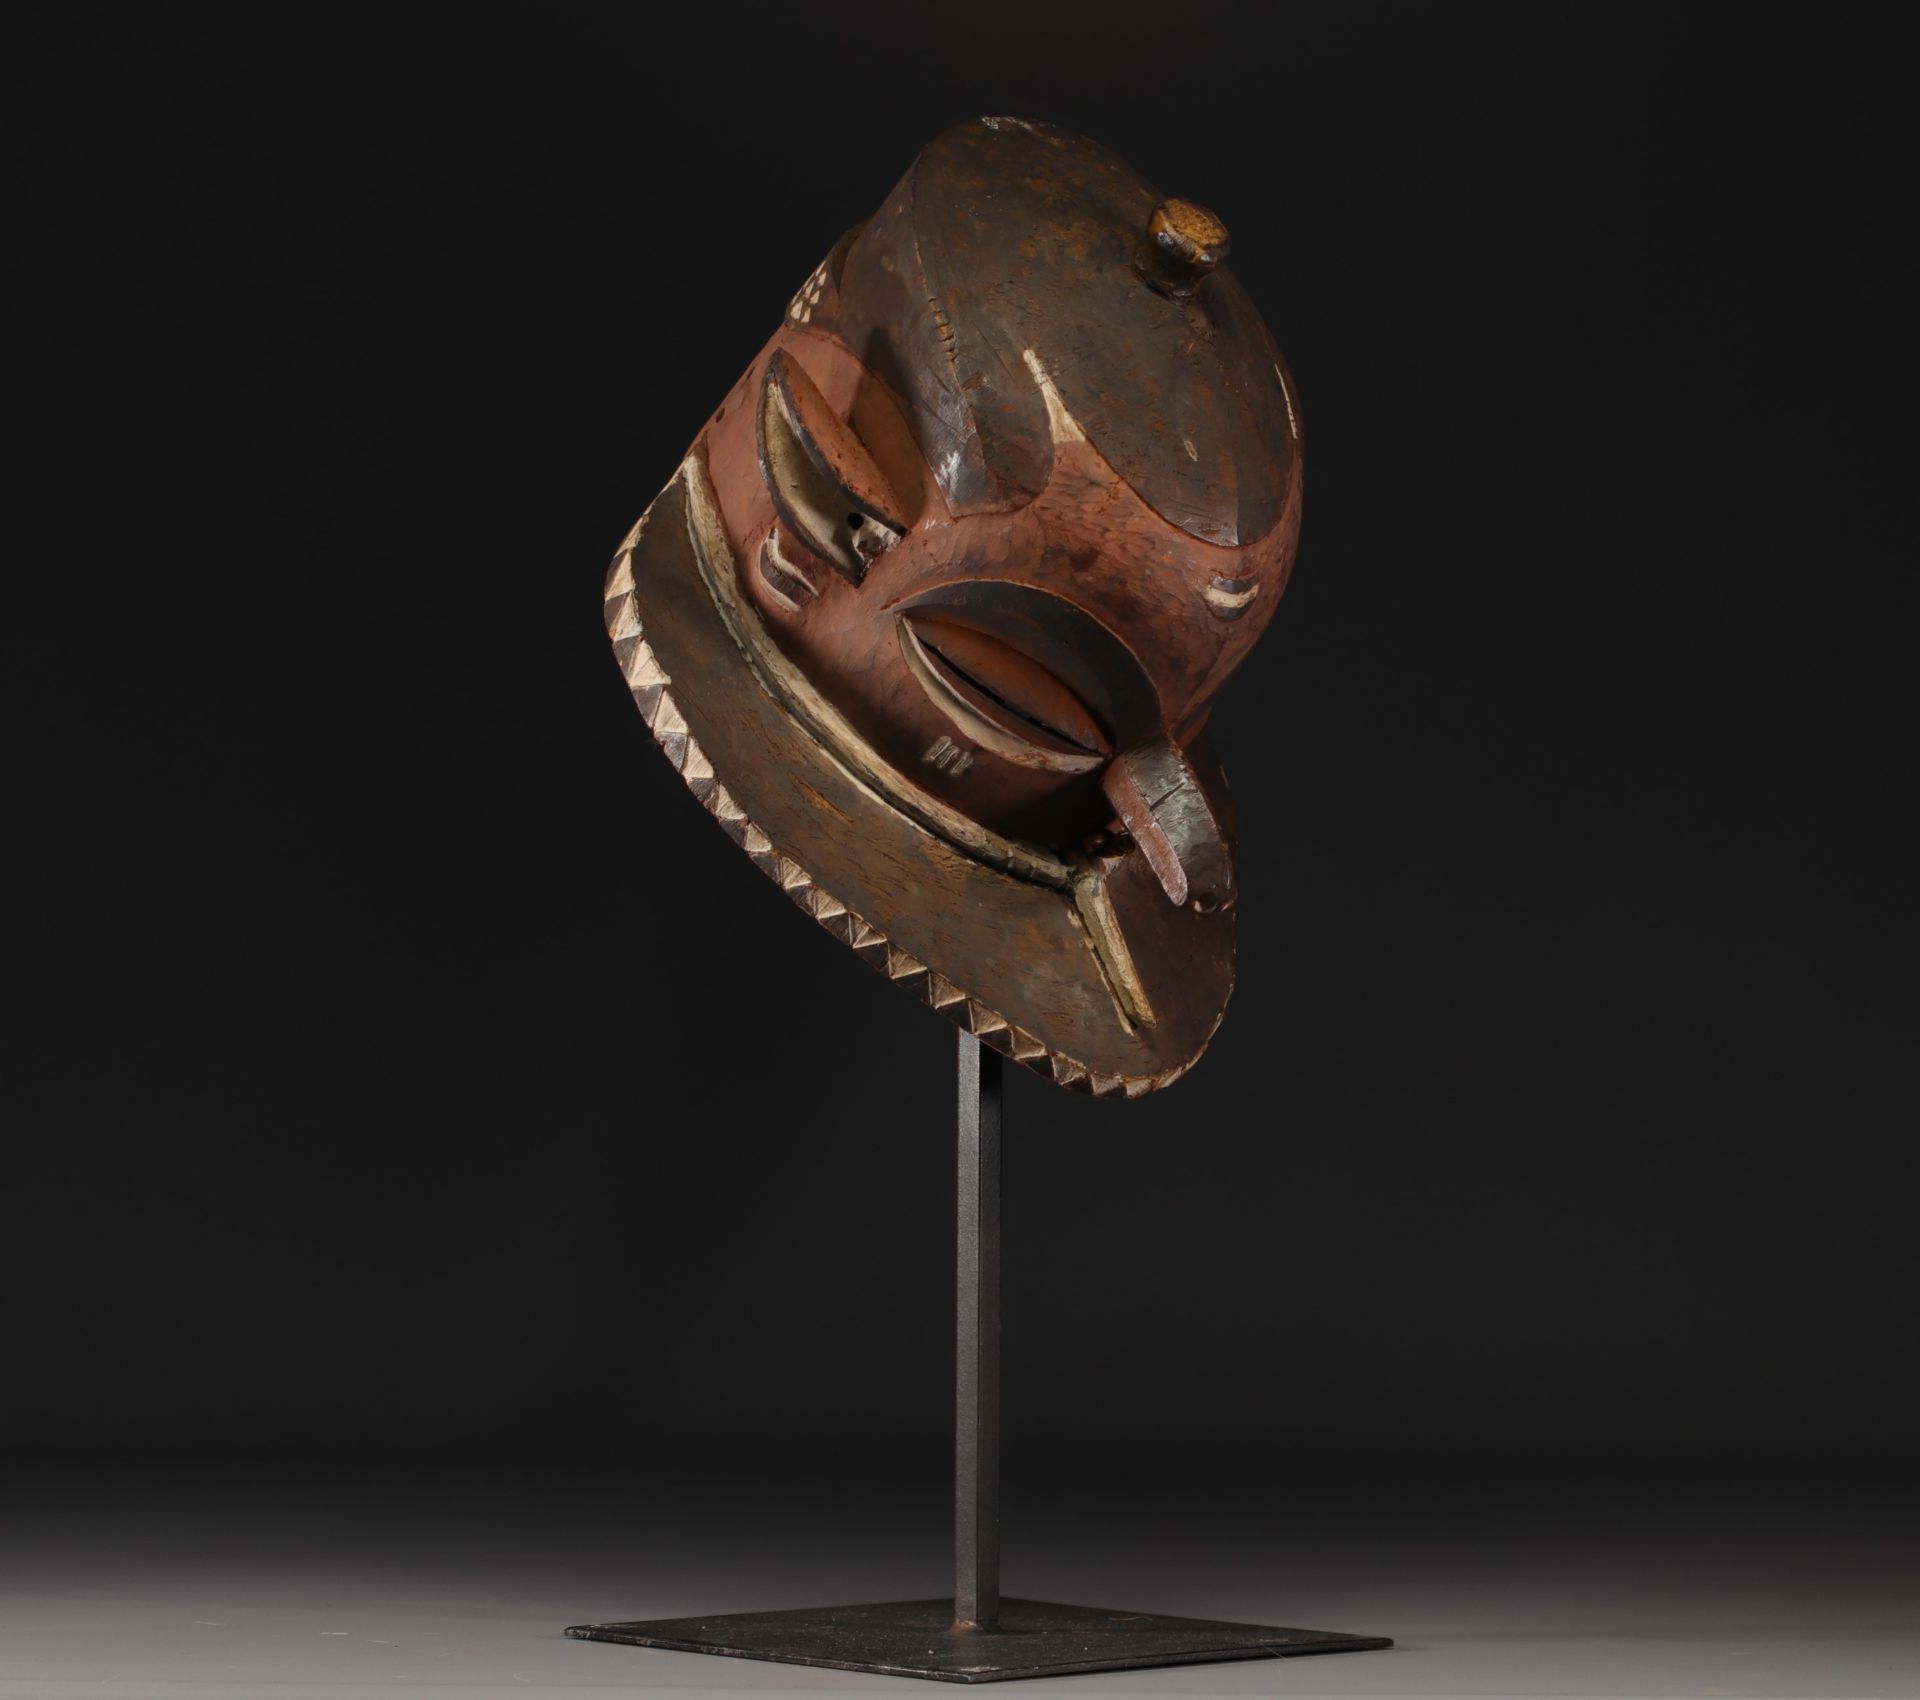 Eastern Pende mask - Dem.Rep.Congo - Image 7 of 7